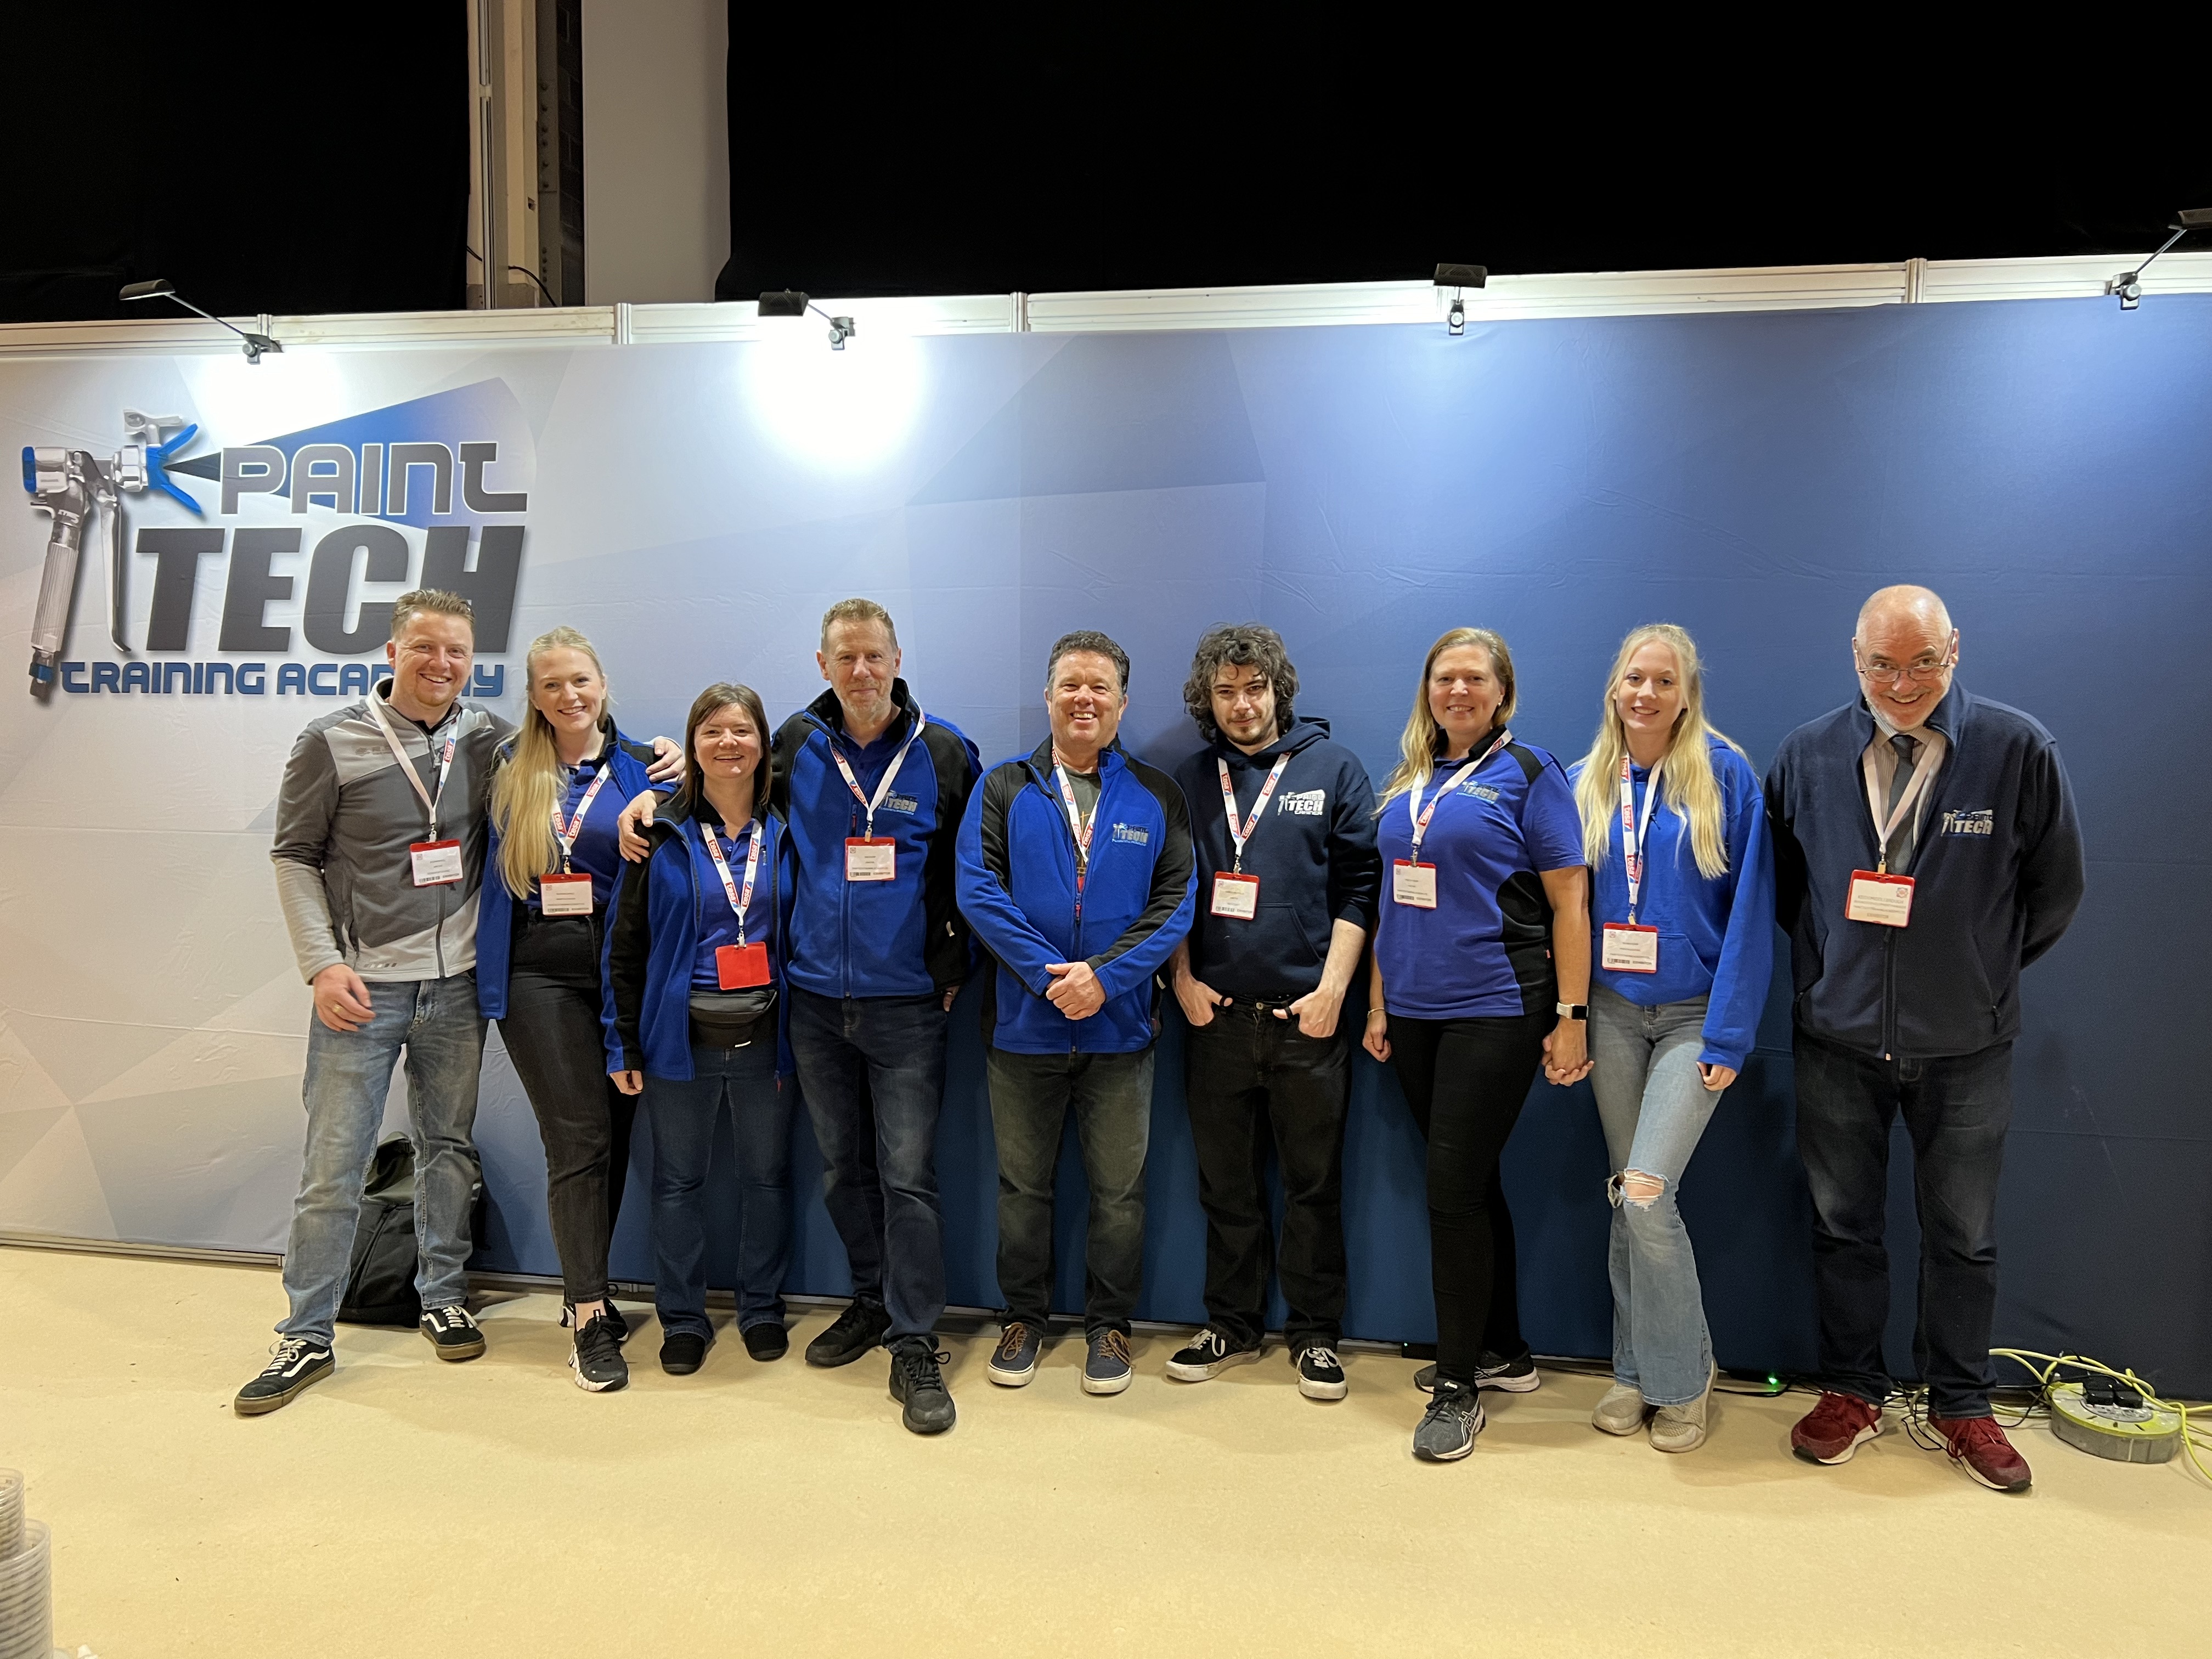 just a photo of the painttech training academy team at the national painting and decorating show